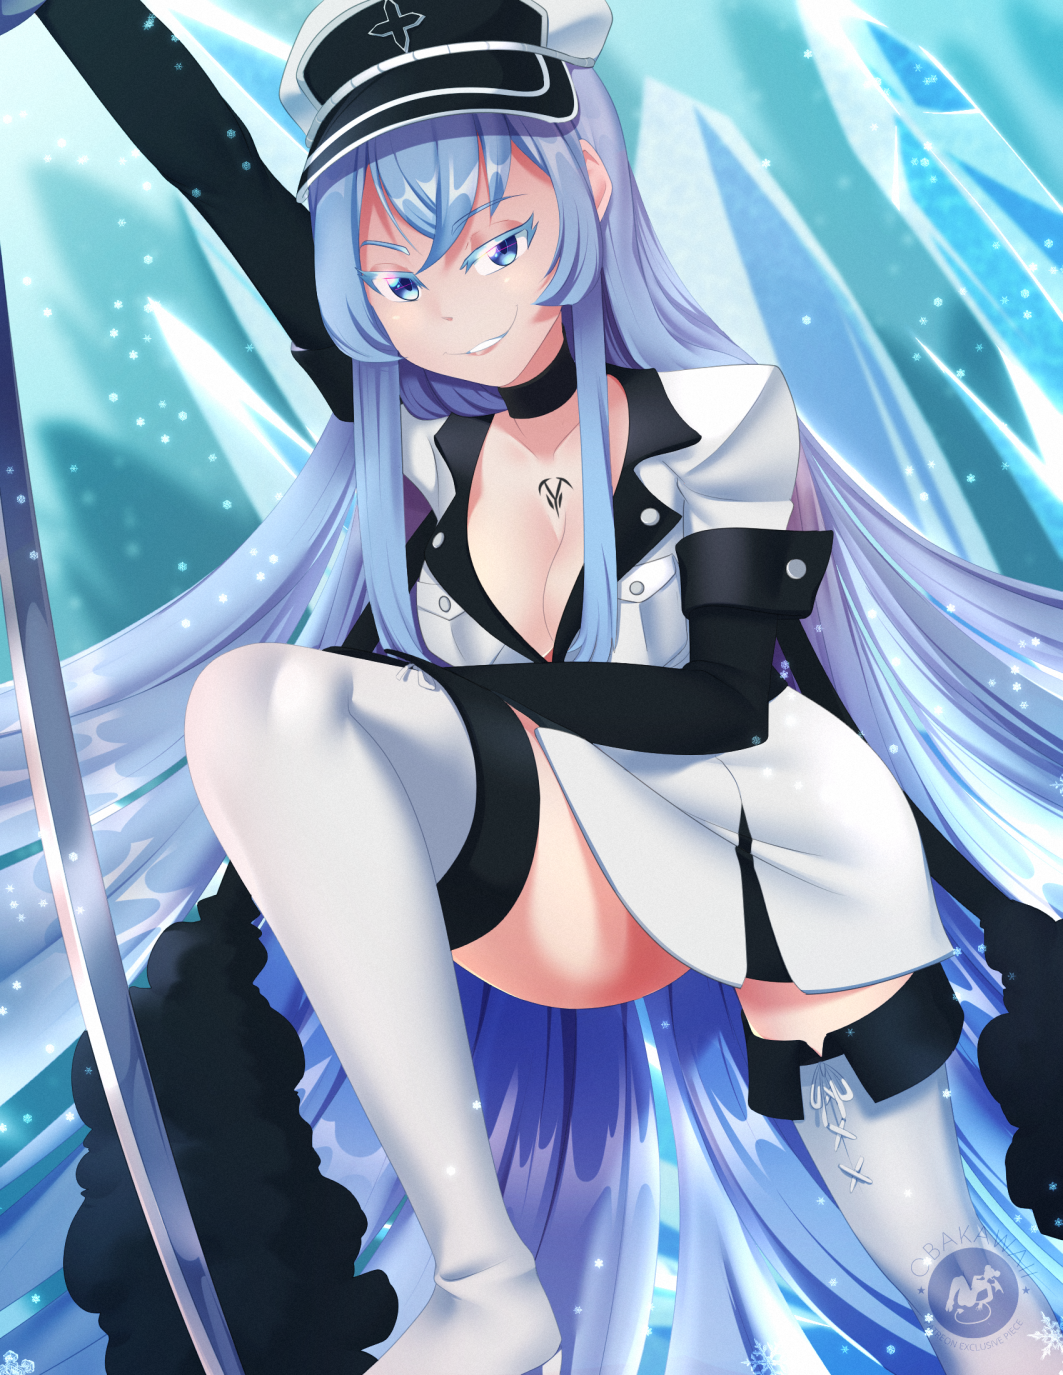 Ice Queen (Esdeath), Anime Adventures Wiki